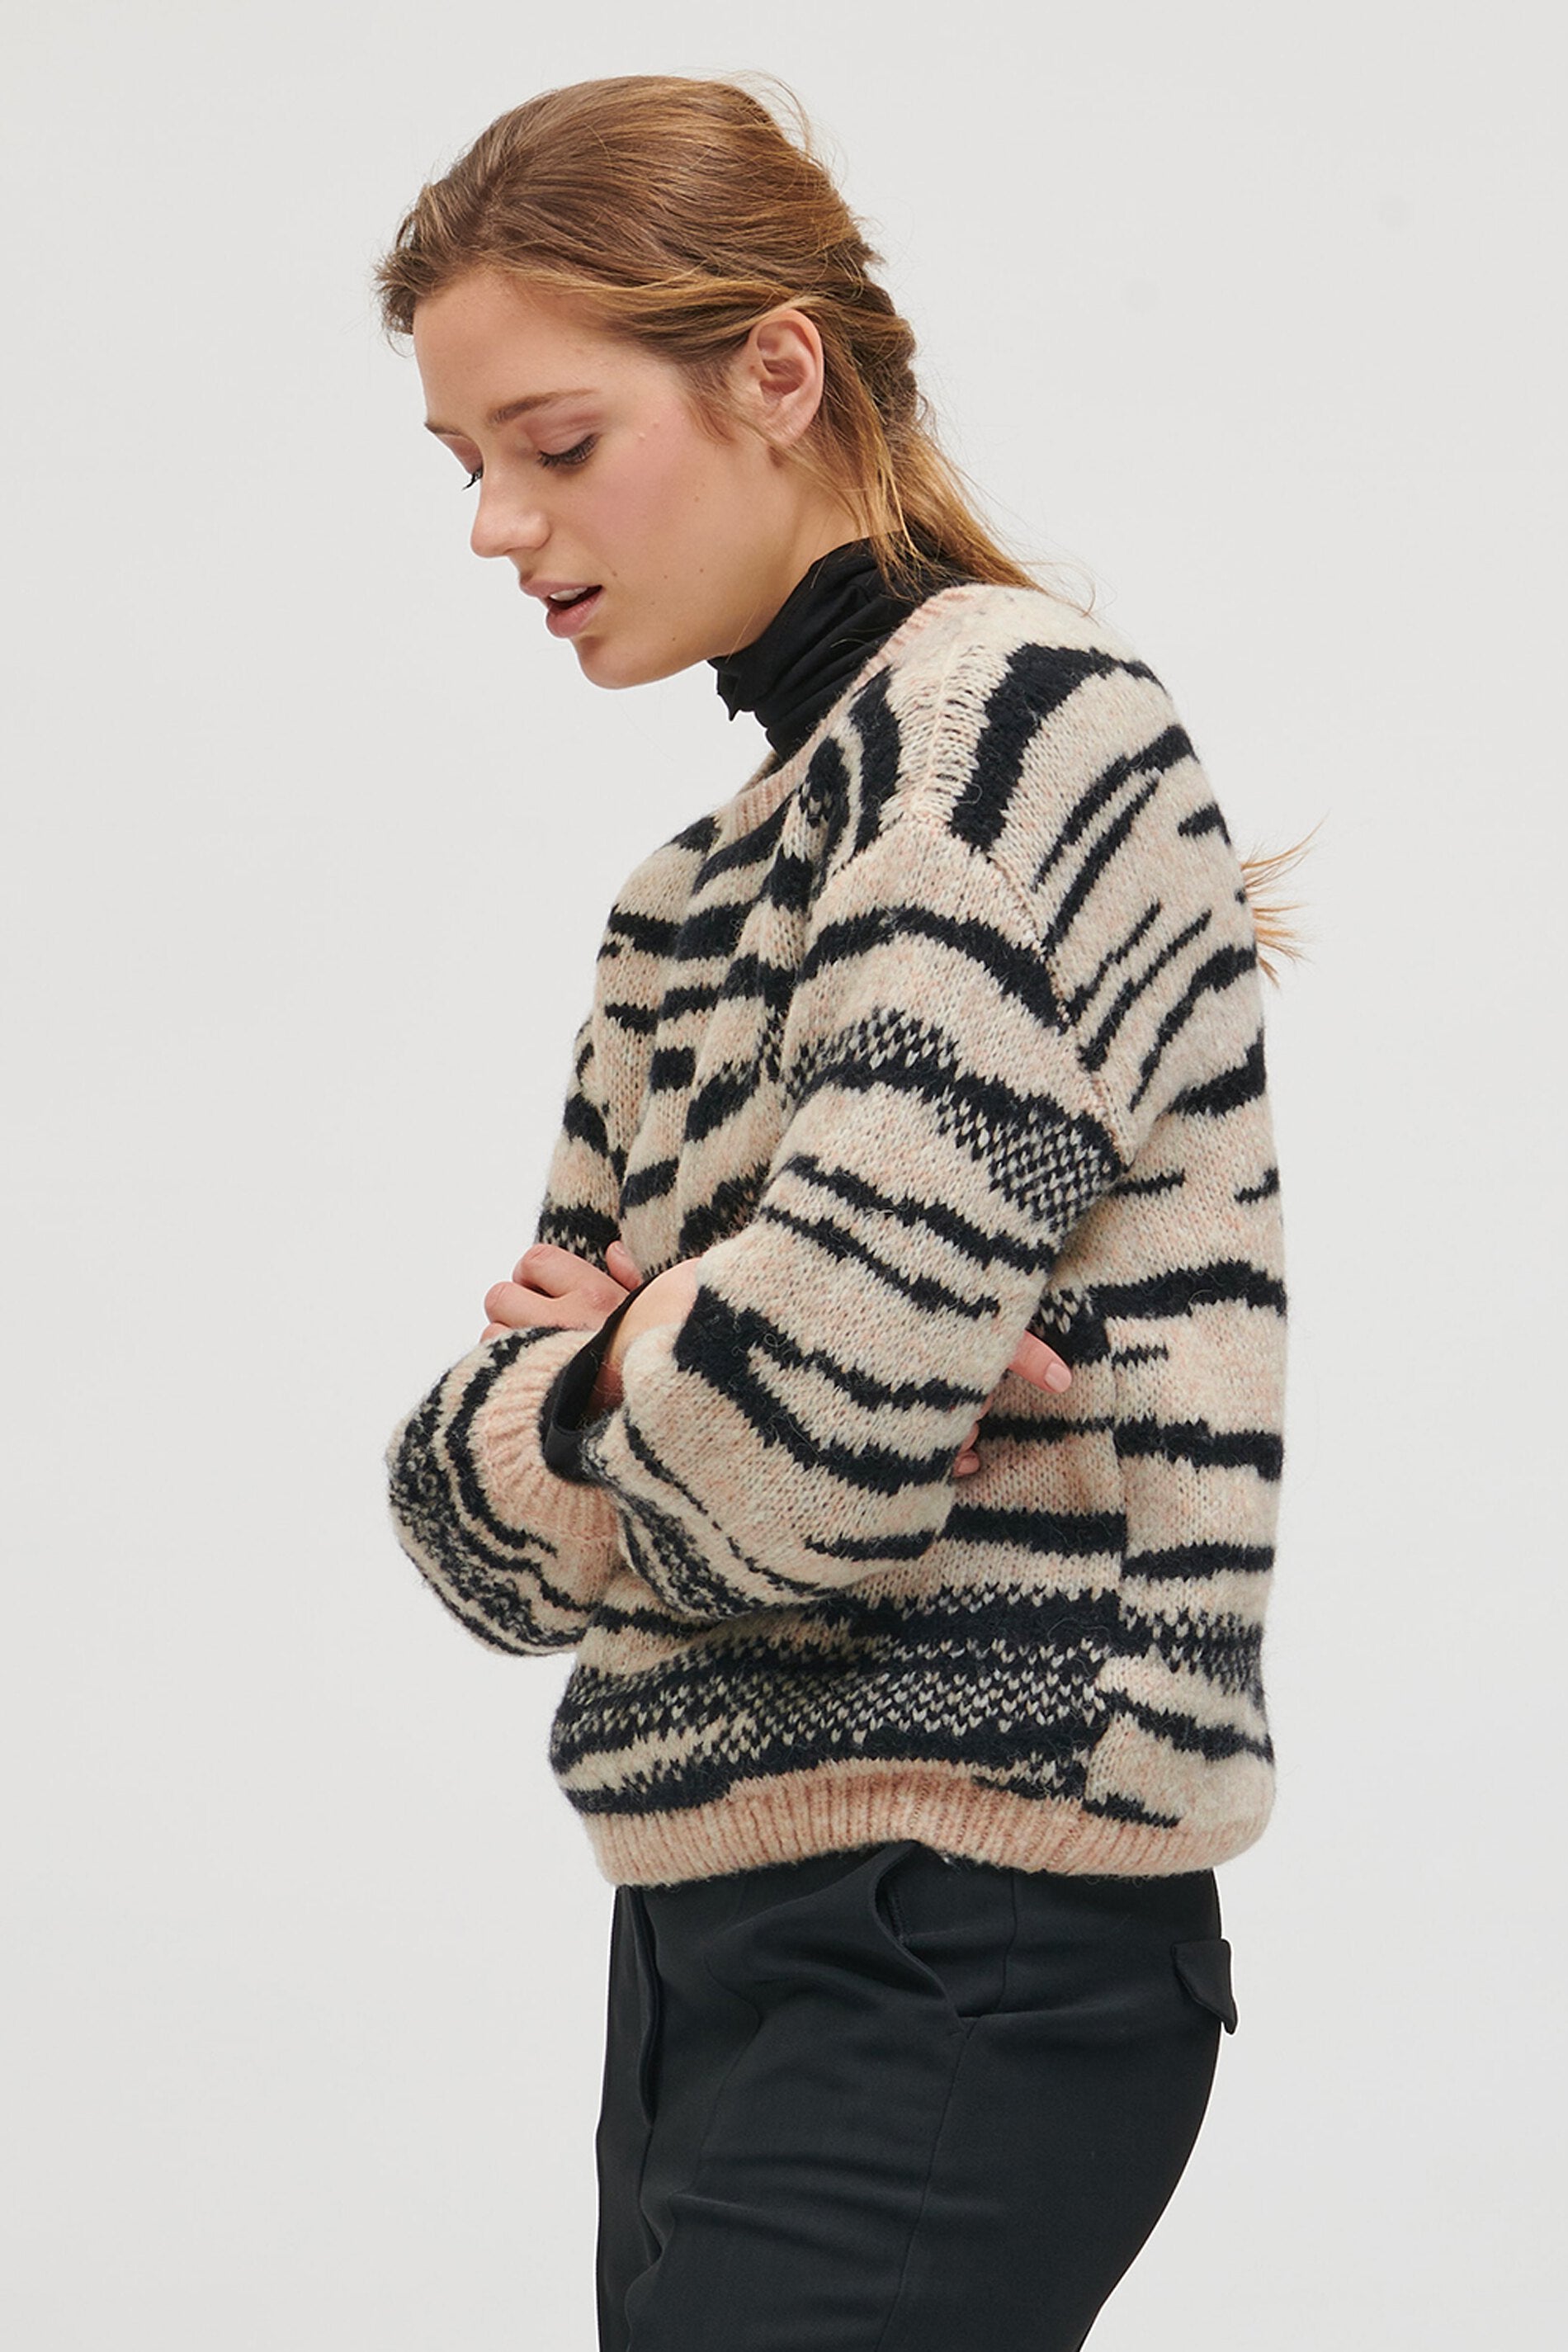 LUISA CERANO-OUTLET-SALE-Pullover in Animal-Jacquard-Strick-by-ARCHIVIST